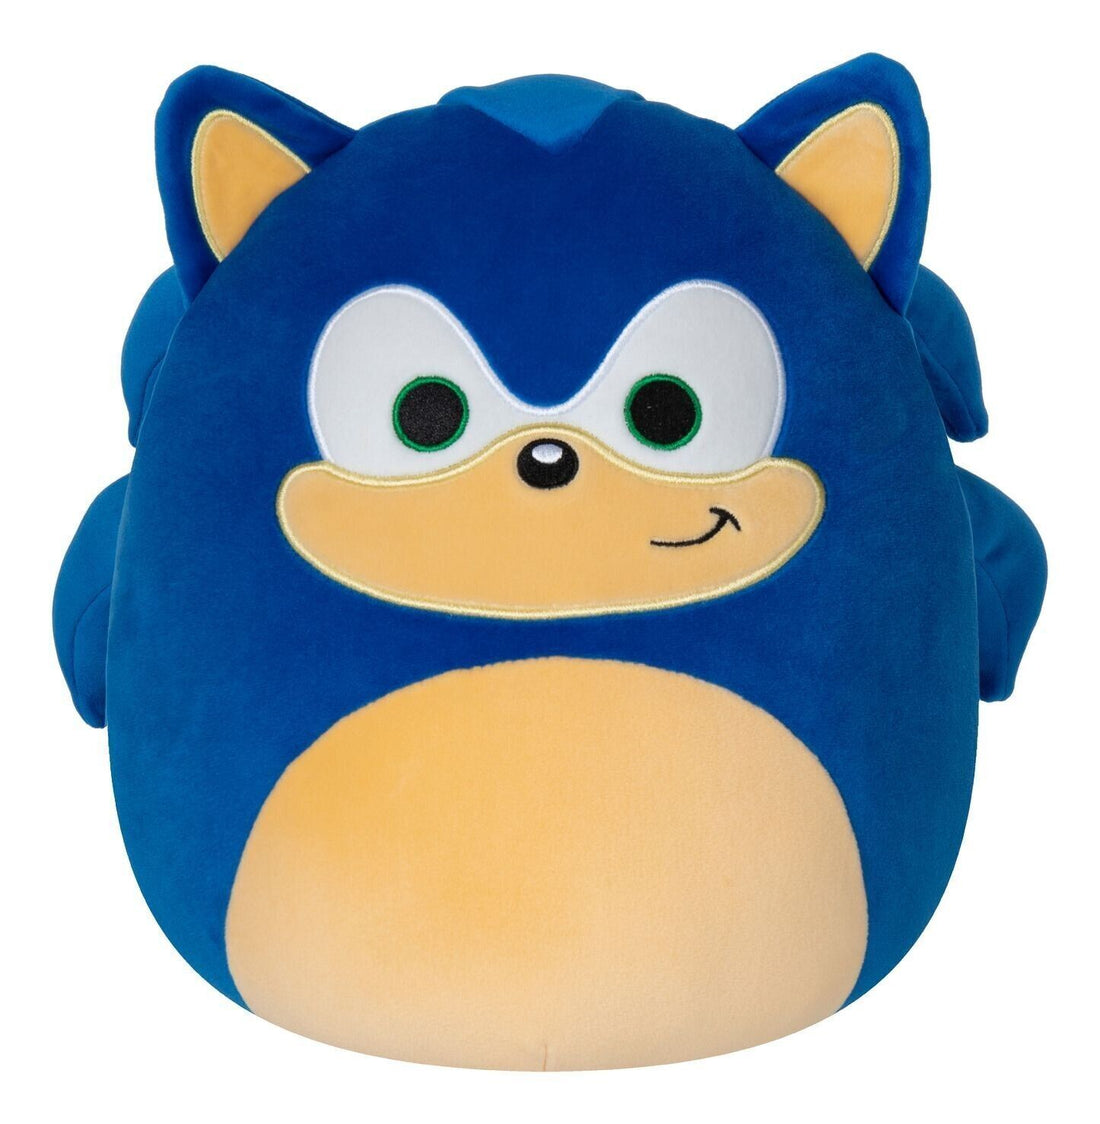 10-Inch Sonic Squishmallows Plush - Super Soft and Huggable Stuffed Toy.. - SONIC